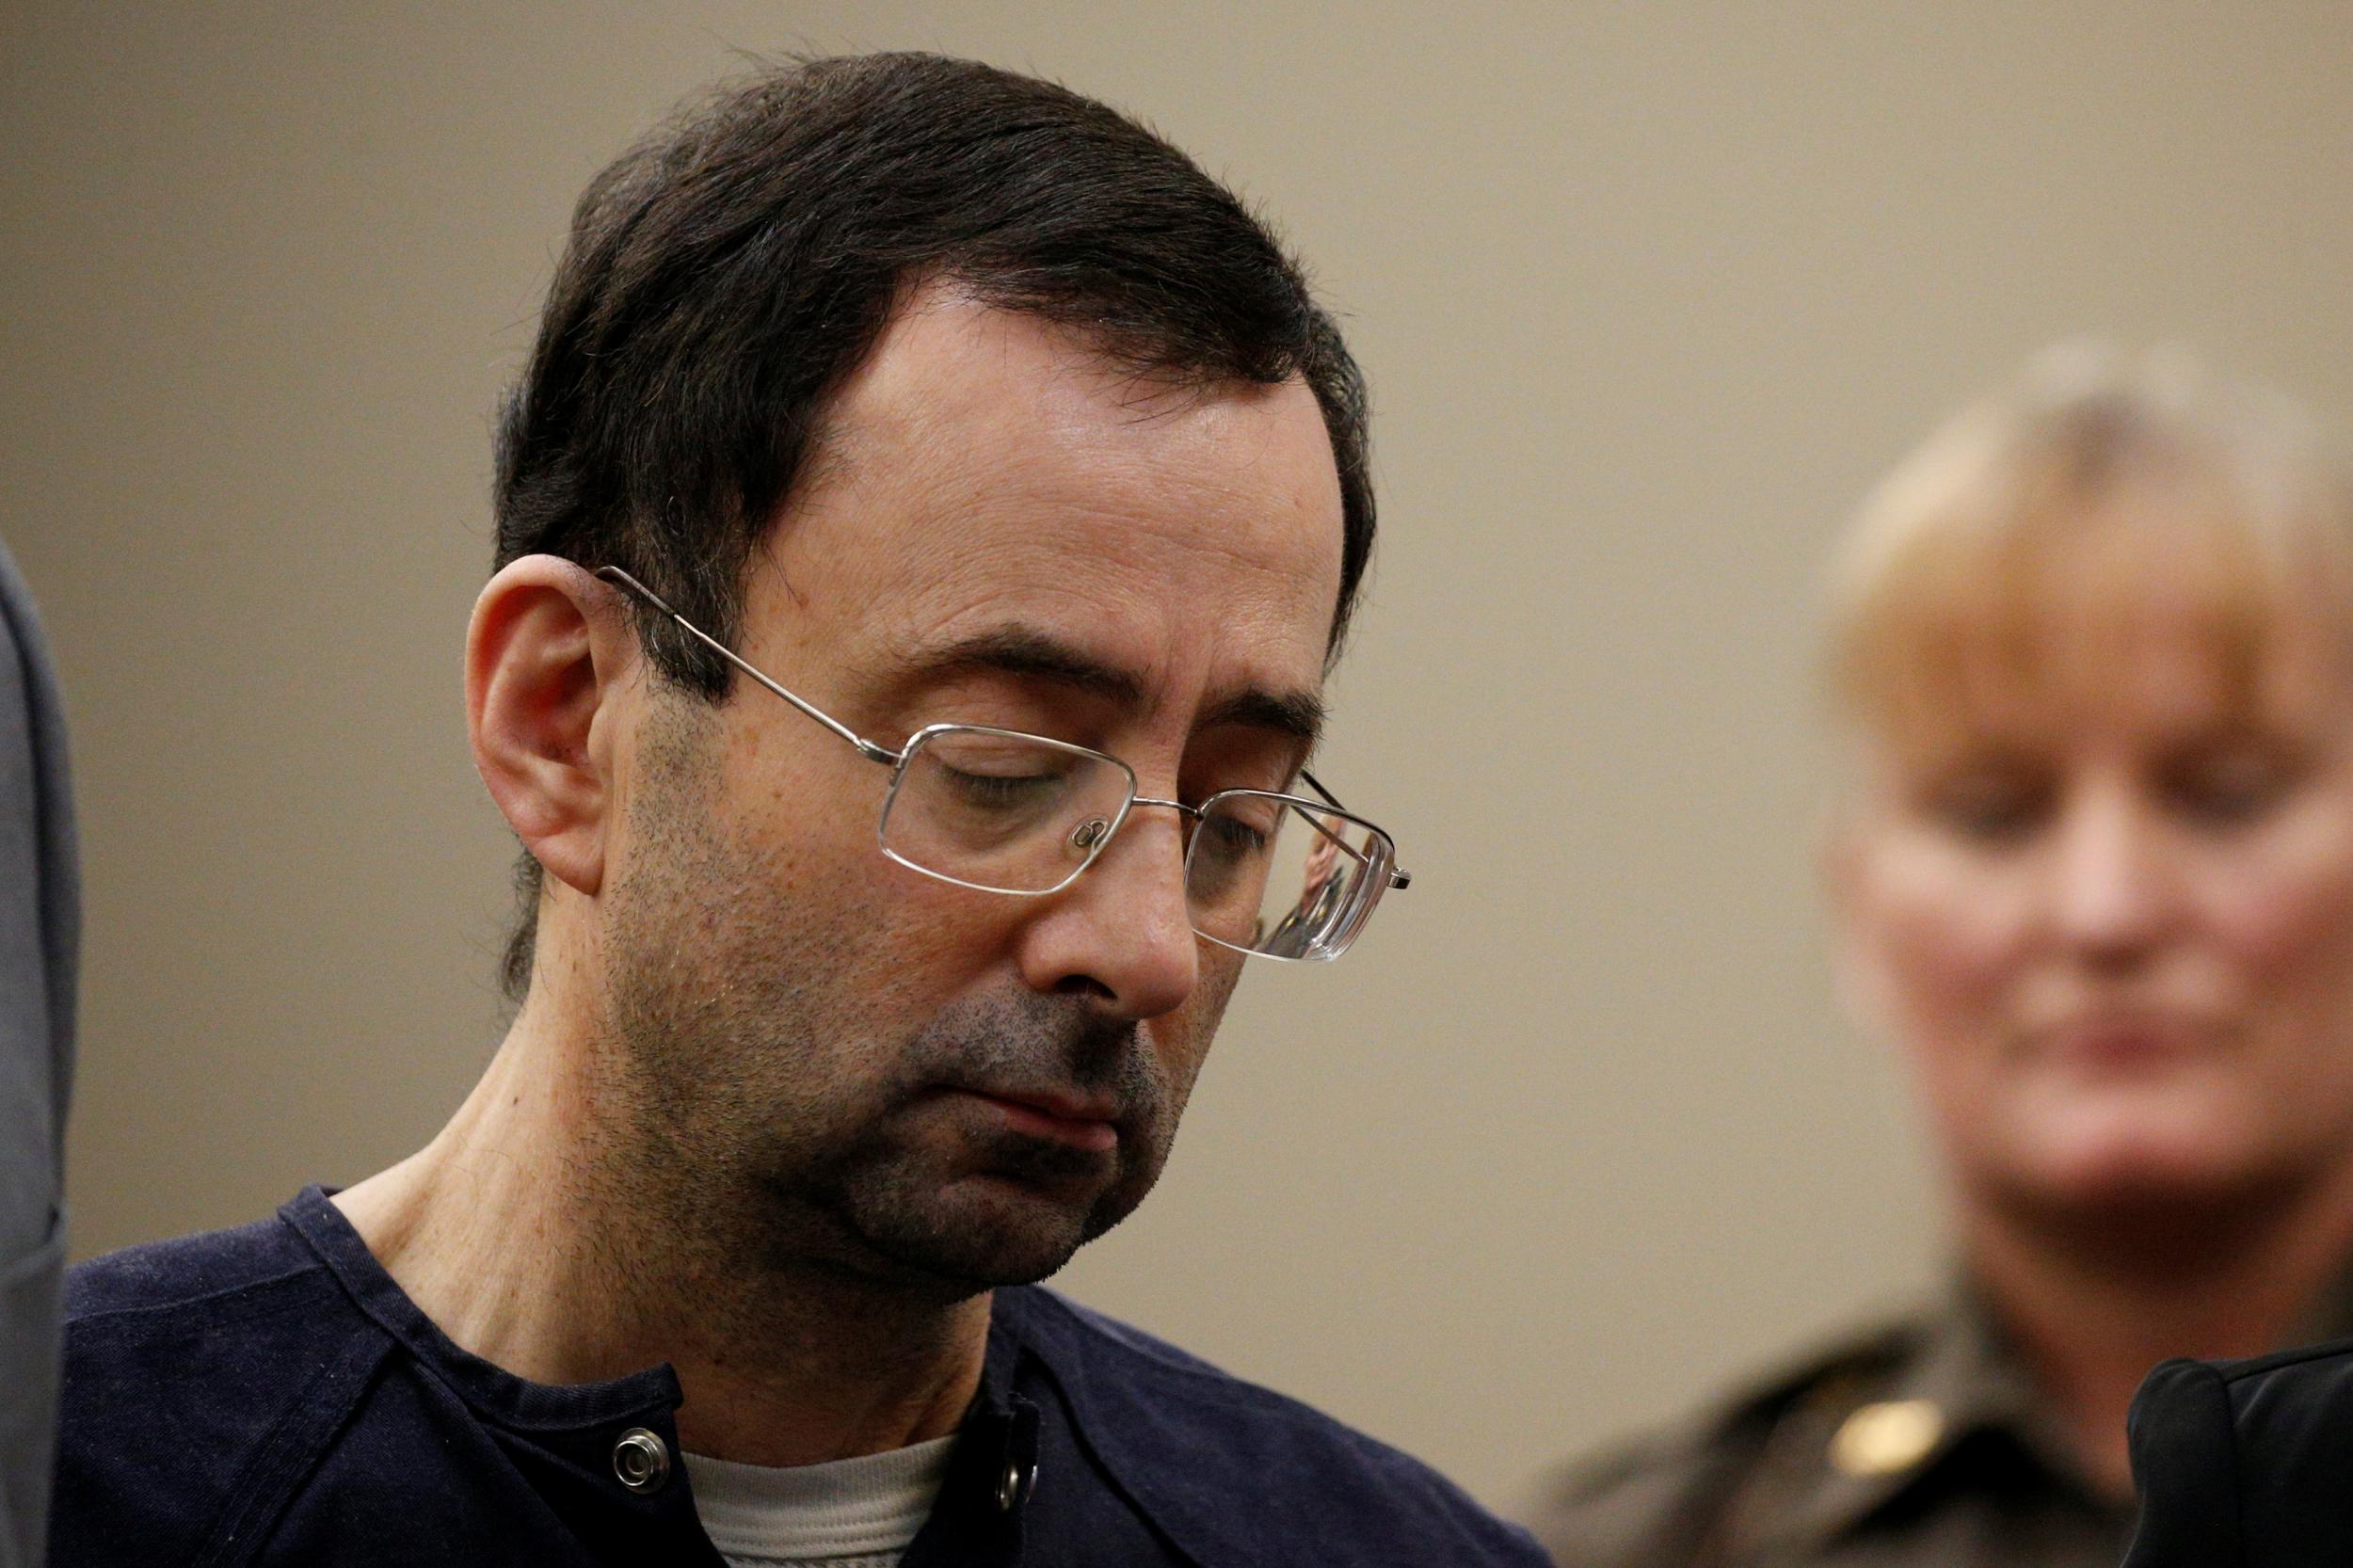 Larry Nassar, a former team USA Gymnastics doctor who pleaded guilty in November 2017 to sexual assault charges